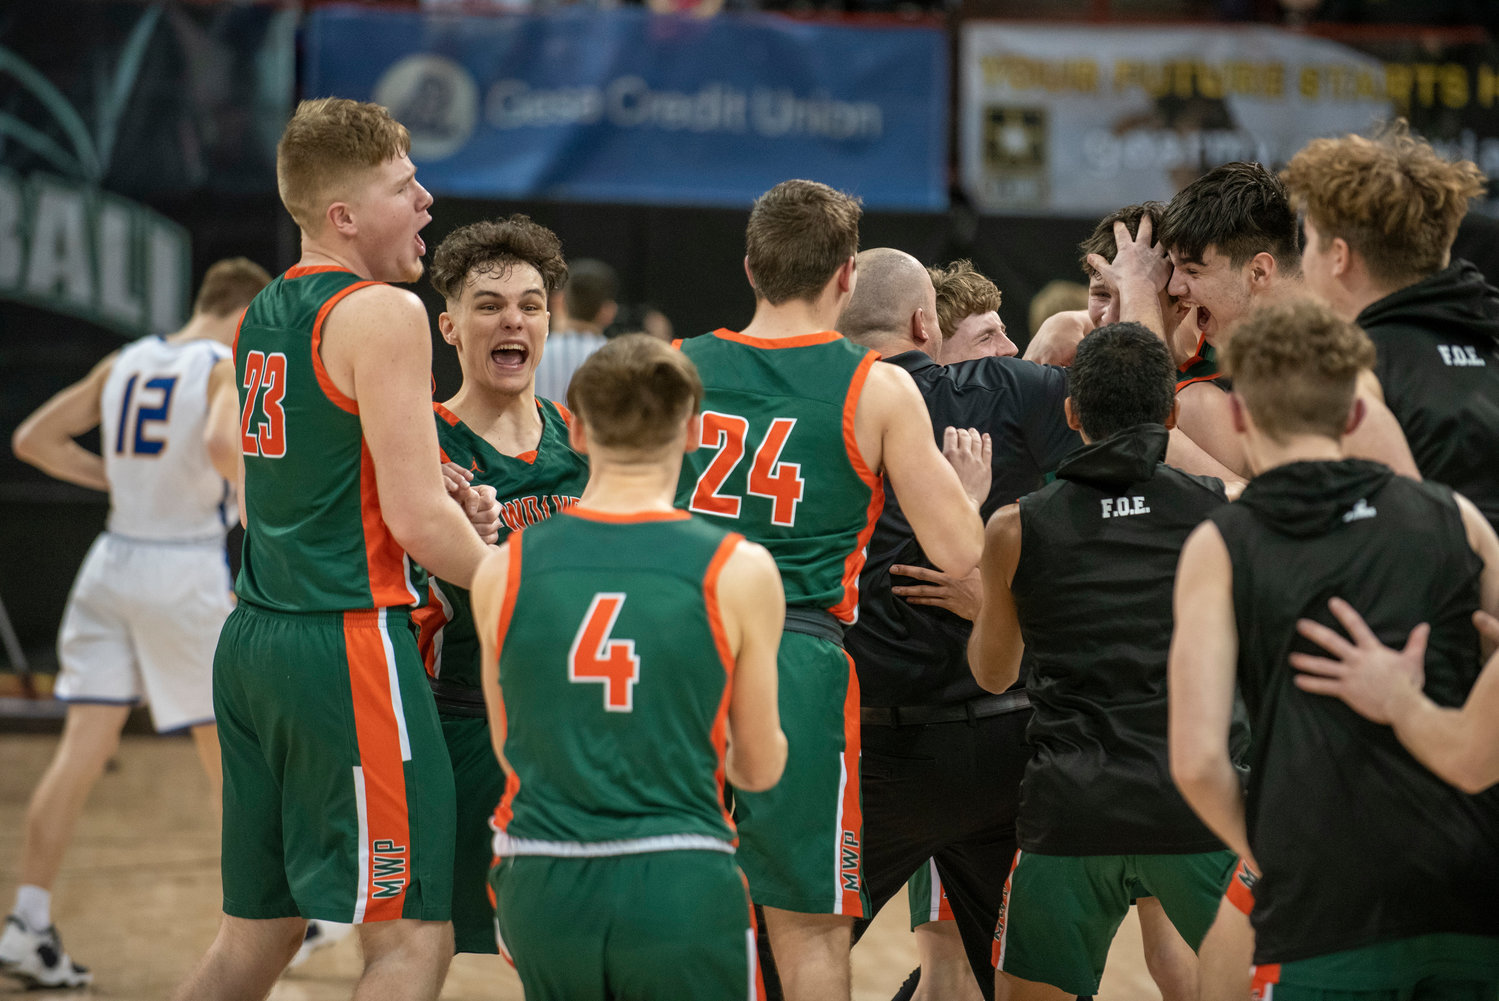 Morton-White Pass celebrates after defeating Colfax in the state quarterfinals Thursday in Spokane.